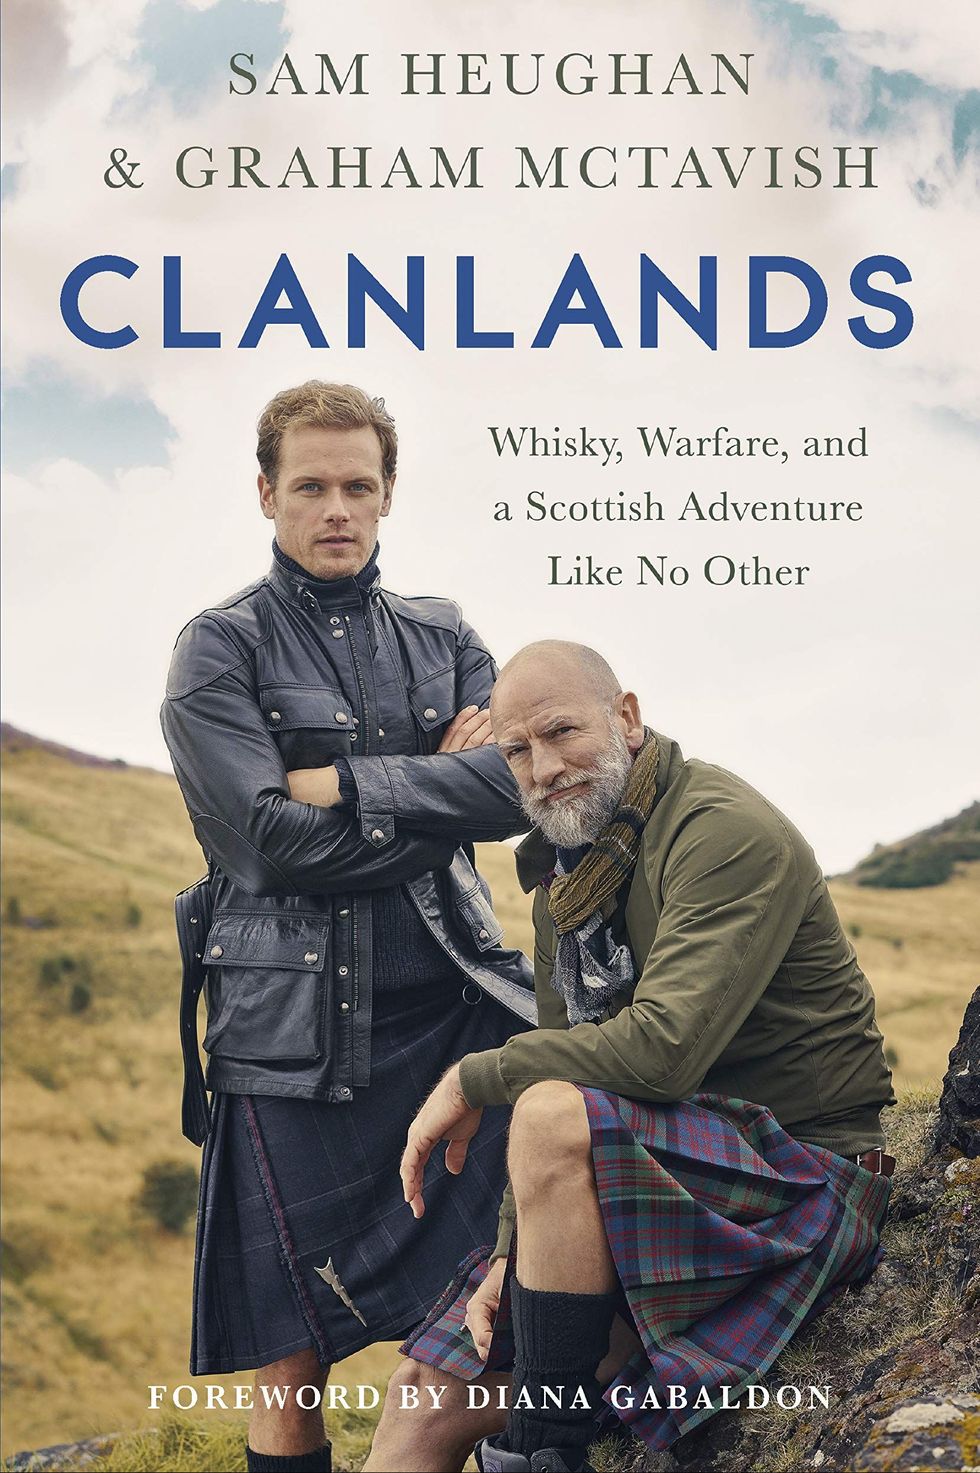 <i>Clanlands: Whisky, Warfare, and a Scottish Adventure Like No Other</i> by Sam Heughan and Graham McTavish